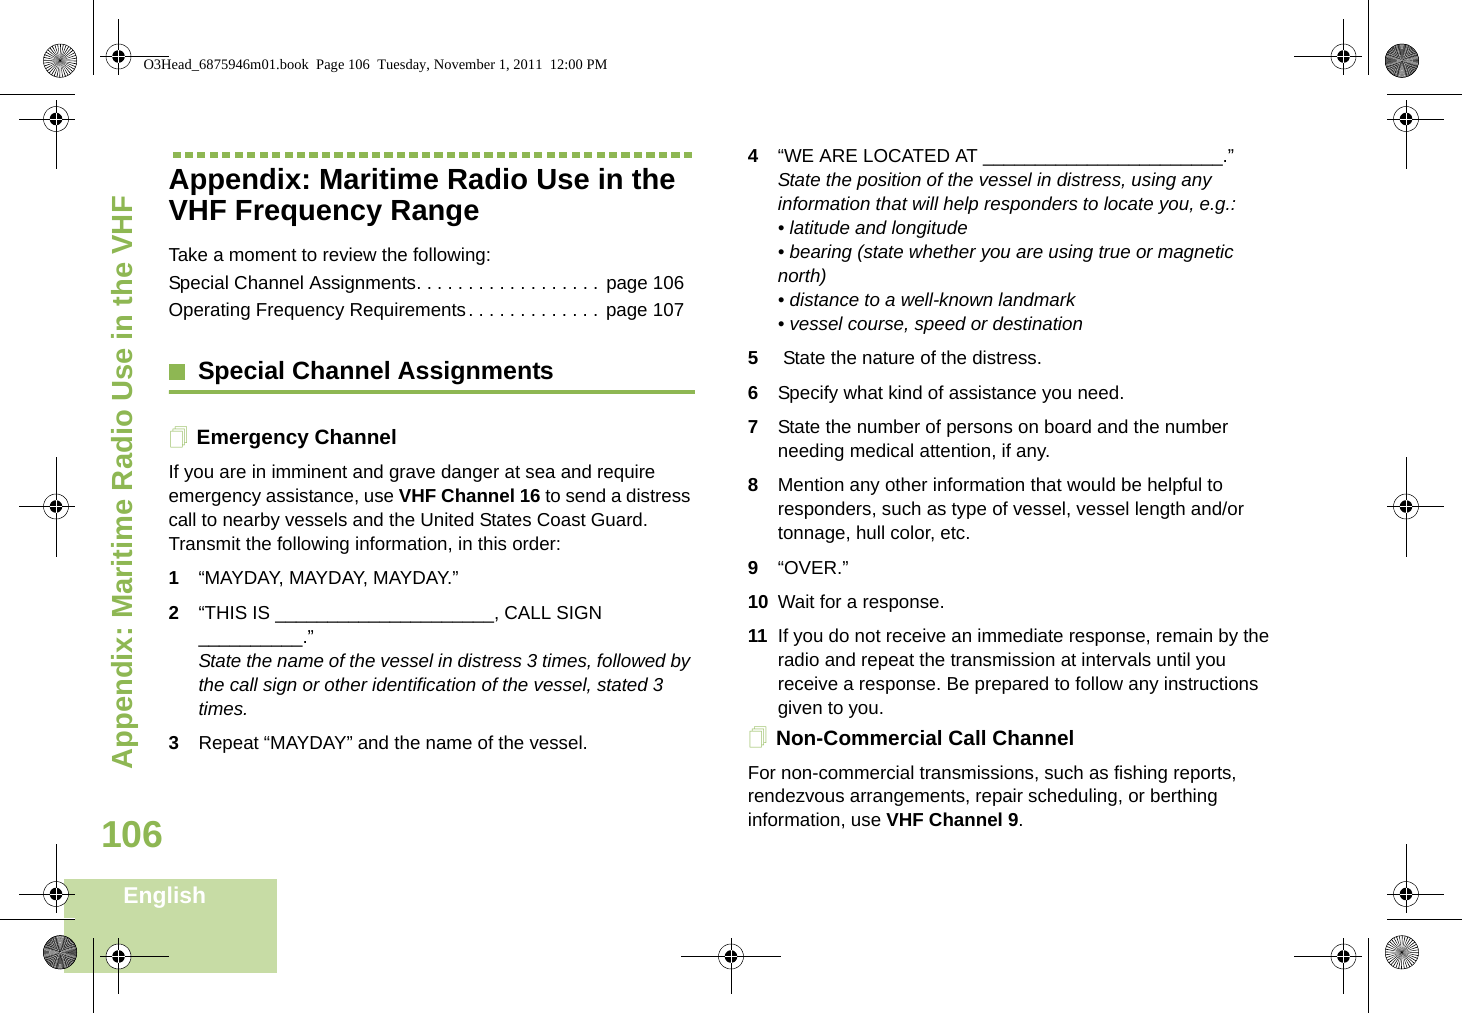 Appendix: Maritime Radio Use in the VHF English106Appendix: Maritime Radio Use in the VHF Frequency RangeTake a moment to review the following:Special Channel Assignments. . . . . . . . . . . . . . . . . . page 106Operating Frequency Requirements. . . . . . . . . . . . .  page 107Special Channel AssignmentsEmergency ChannelIf you are in imminent and grave danger at sea and require emergency assistance, use VHF Channel 16 to send a distress call to nearby vessels and the United States Coast Guard. Transmit the following information, in this order:1“MAYDAY, MAYDAY, MAYDAY.”2“THIS IS _____________________, CALL SIGN __________.”State the name of the vessel in distress 3 times, followed by the call sign or other identification of the vessel, stated 3 times.3Repeat “MAYDAY” and the name of the vessel.4“WE ARE LOCATED AT _______________________.” State the position of the vessel in distress, using any information that will help responders to locate you, e.g.:• latitude and longitude• bearing (state whether you are using true or magnetic north)• distance to a well-known landmark • vessel course, speed or destination 5 State the nature of the distress.6Specify what kind of assistance you need. 7State the number of persons on board and the number needing medical attention, if any. 8Mention any other information that would be helpful to responders, such as type of vessel, vessel length and/or tonnage, hull color, etc.9“OVER.” 10 Wait for a response. 11 If you do not receive an immediate response, remain by the radio and repeat the transmission at intervals until you receive a response. Be prepared to follow any instructions given to you.Non-Commercial Call ChannelFor non-commercial transmissions, such as fishing reports, rendezvous arrangements, repair scheduling, or berthing information, use VHF Channel 9.O3Head_6875946m01.book  Page 106  Tuesday, November 1, 2011  12:00 PM